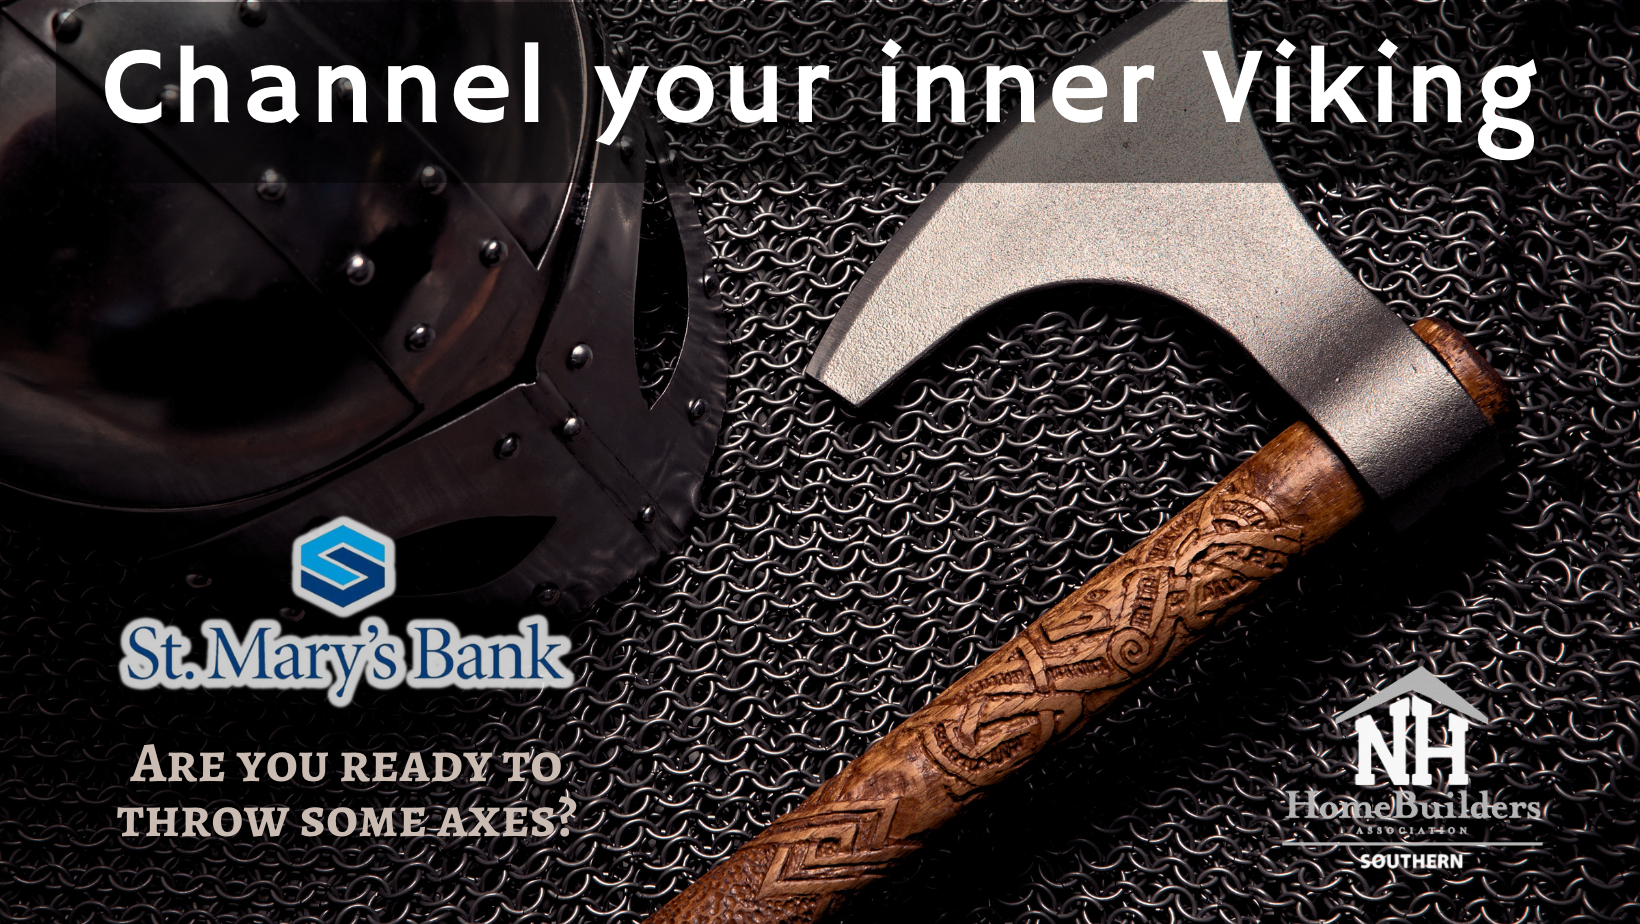 Channel Your inner Viking